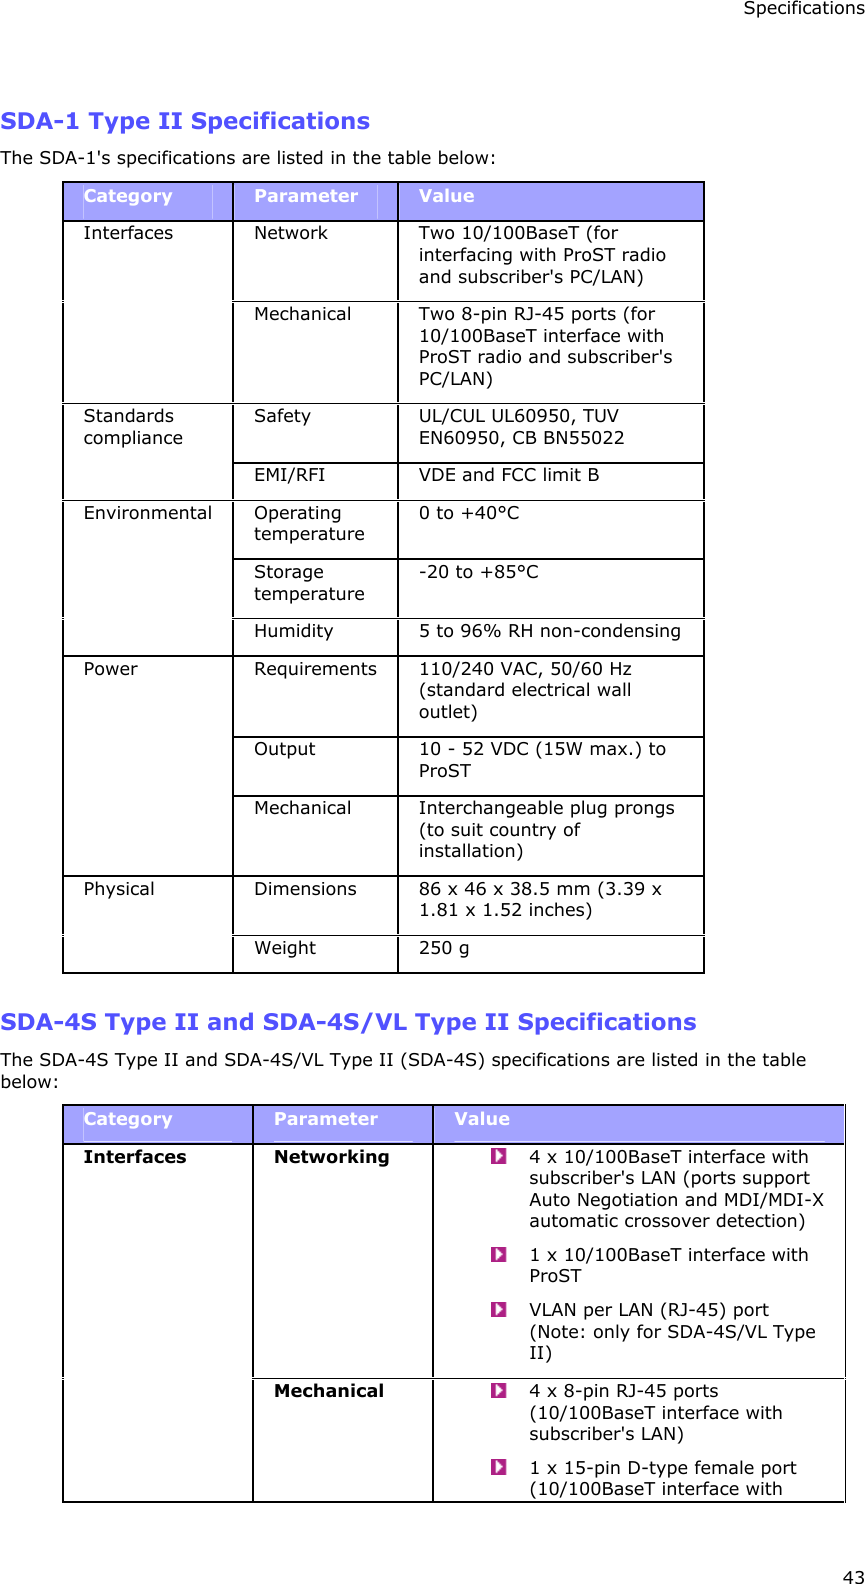 Specifications 43  SDA-1 Type II Specifications The SDA-1&apos;s specifications are listed in the table below: Category  Parameter   Value Network   Two 10/100BaseT (for interfacing with ProST radio and subscriber&apos;s PC/LAN) Interfaces Mechanical  Two 8-pin RJ-45 ports (for 10/100BaseT interface with ProST radio and subscriber&apos;s PC/LAN) Safety  UL/CUL UL60950, TUV EN60950, CB BN55022 Standards compliance EMI/RFI  VDE and FCC limit B Operating temperature  0 to +40°C Storage temperature  -20 to +85°C Environmental Humidity  5 to 96% RH non-condensing Requirements  110/240 VAC, 50/60 Hz (standard electrical wall outlet) Output  10 - 52 VDC (15W max.) to ProST Power  Mechanical   Interchangeable plug prongs (to suit country of installation) Dimensions  86 x 46 x 38.5 mm (3.39 x 1.81 x 1.52 inches) Physical  Weight  250 g  SDA-4S Type II and SDA-4S/VL Type II Specifications The SDA-4S Type II and SDA-4S/VL Type II (SDA-4S) specifications are listed in the table below: Category  Parameter  Value Networking    4 x 10/100BaseT interface with subscriber&apos;s LAN (ports support Auto Negotiation and MDI/MDI-X automatic crossover detection)  1 x 10/100BaseT interface with ProST  VLAN per LAN (RJ-45) port (Note: only for SDA-4S/VL Type II) Interfaces Mechanical    4 x 8-pin RJ-45 ports (10/100BaseT interface with subscriber&apos;s LAN)  1 x 15-pin D-type female port (10/100BaseT interface with 